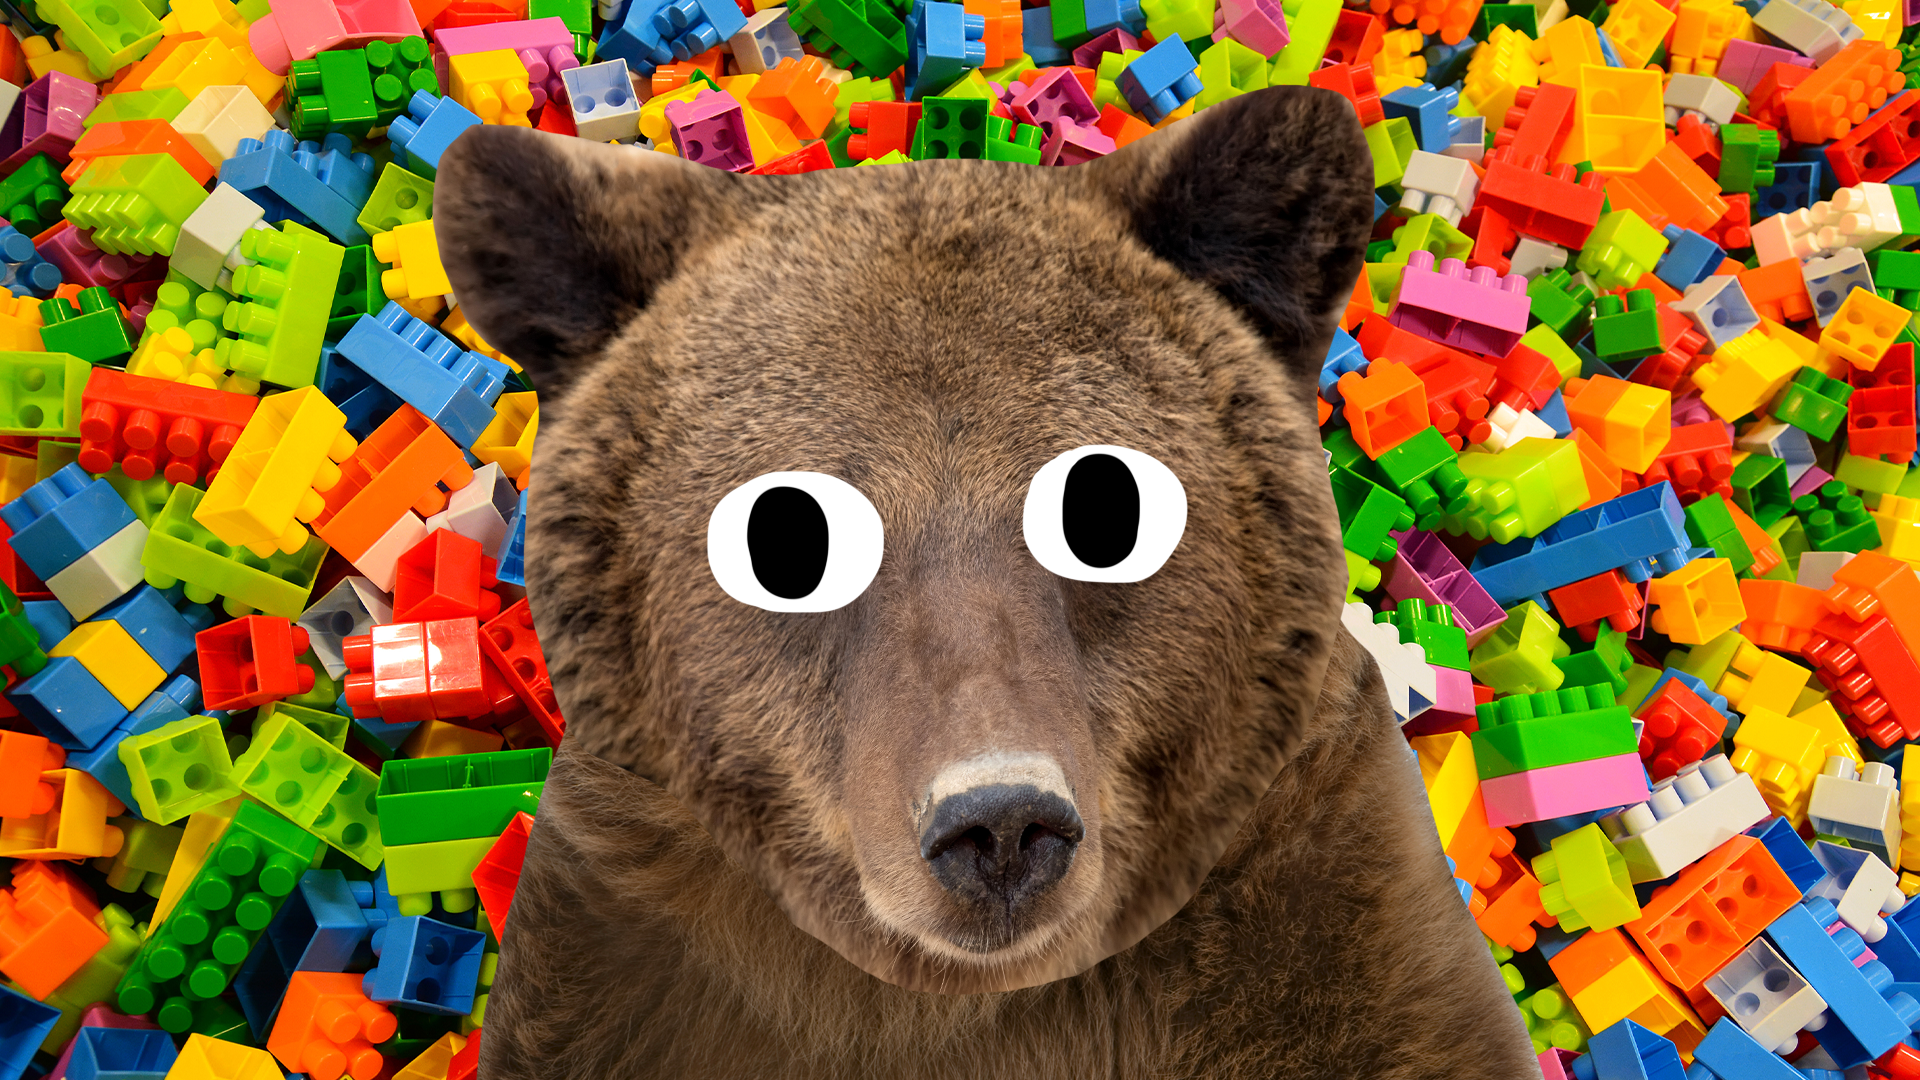 A bear and a pile of Lego